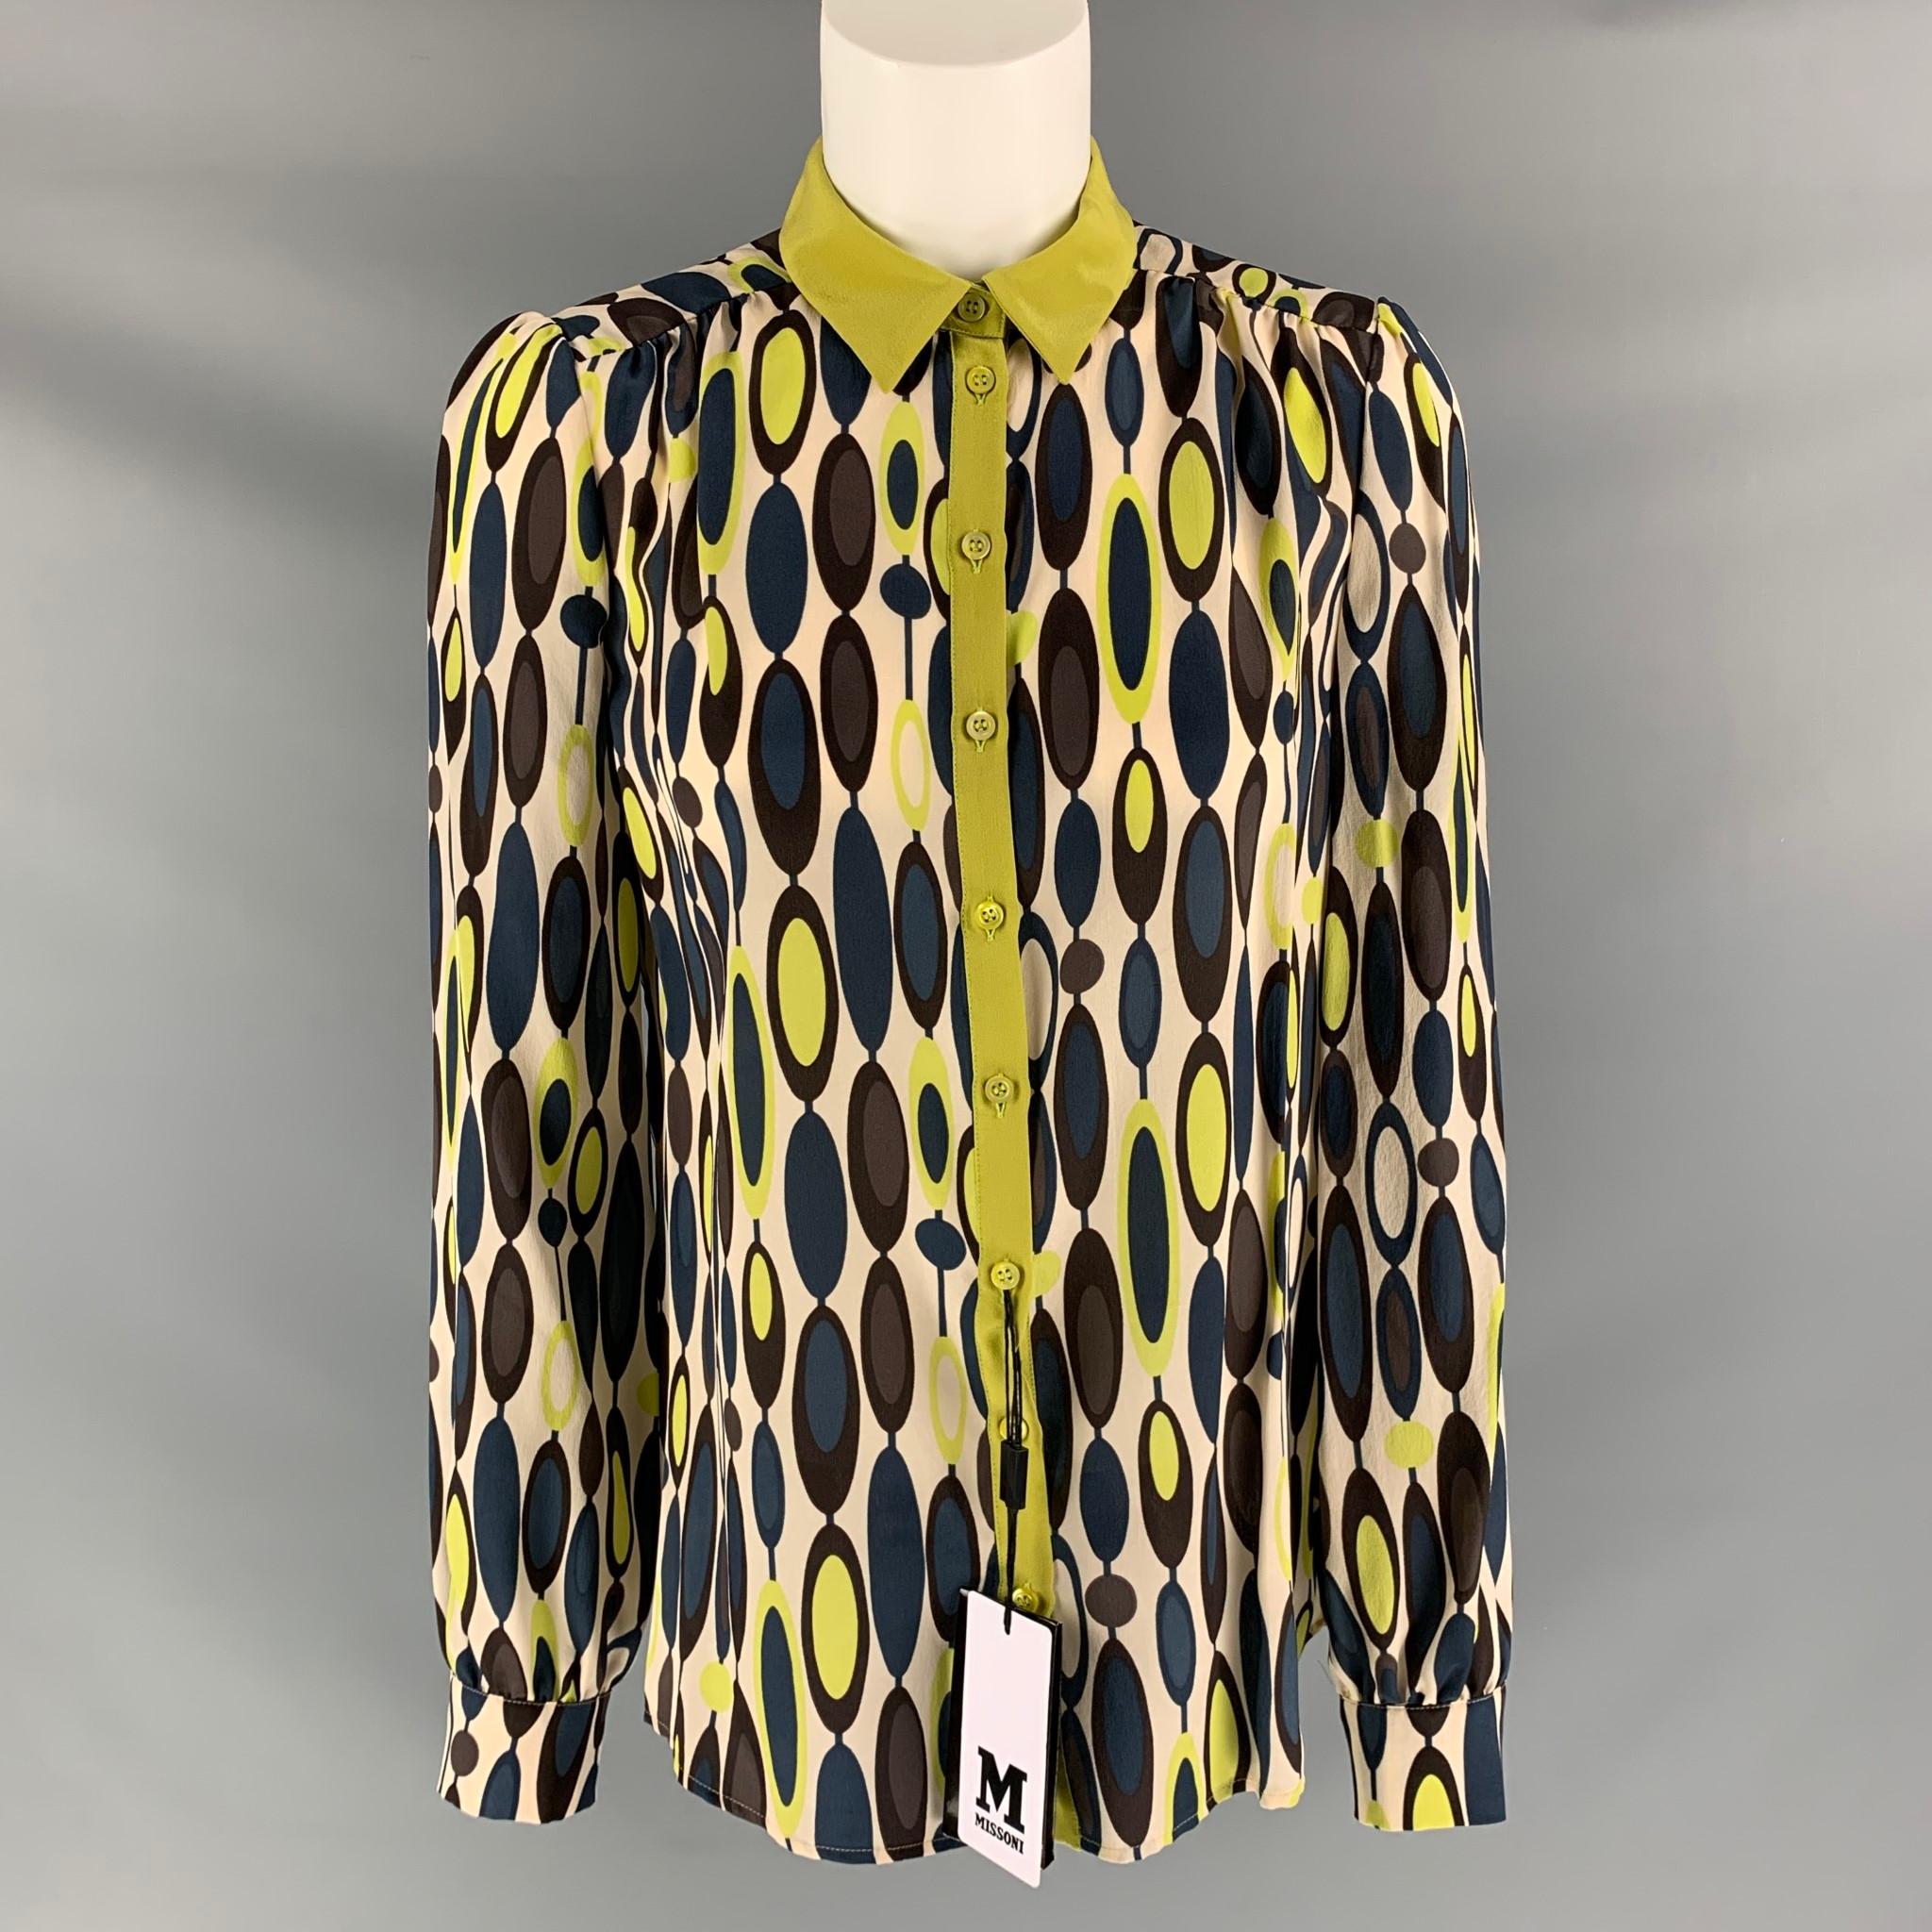 M MISSONI blouse comes in green, blue and cream silk with abstract print features a green collar and button down closure. Made in Italy.

New with Tag.
Marked: 40IT 4USA

Measurements:

Shoulder: 17 in
Bust: 19 in
Sleeve: 24.5 in
Length: 25.5 in